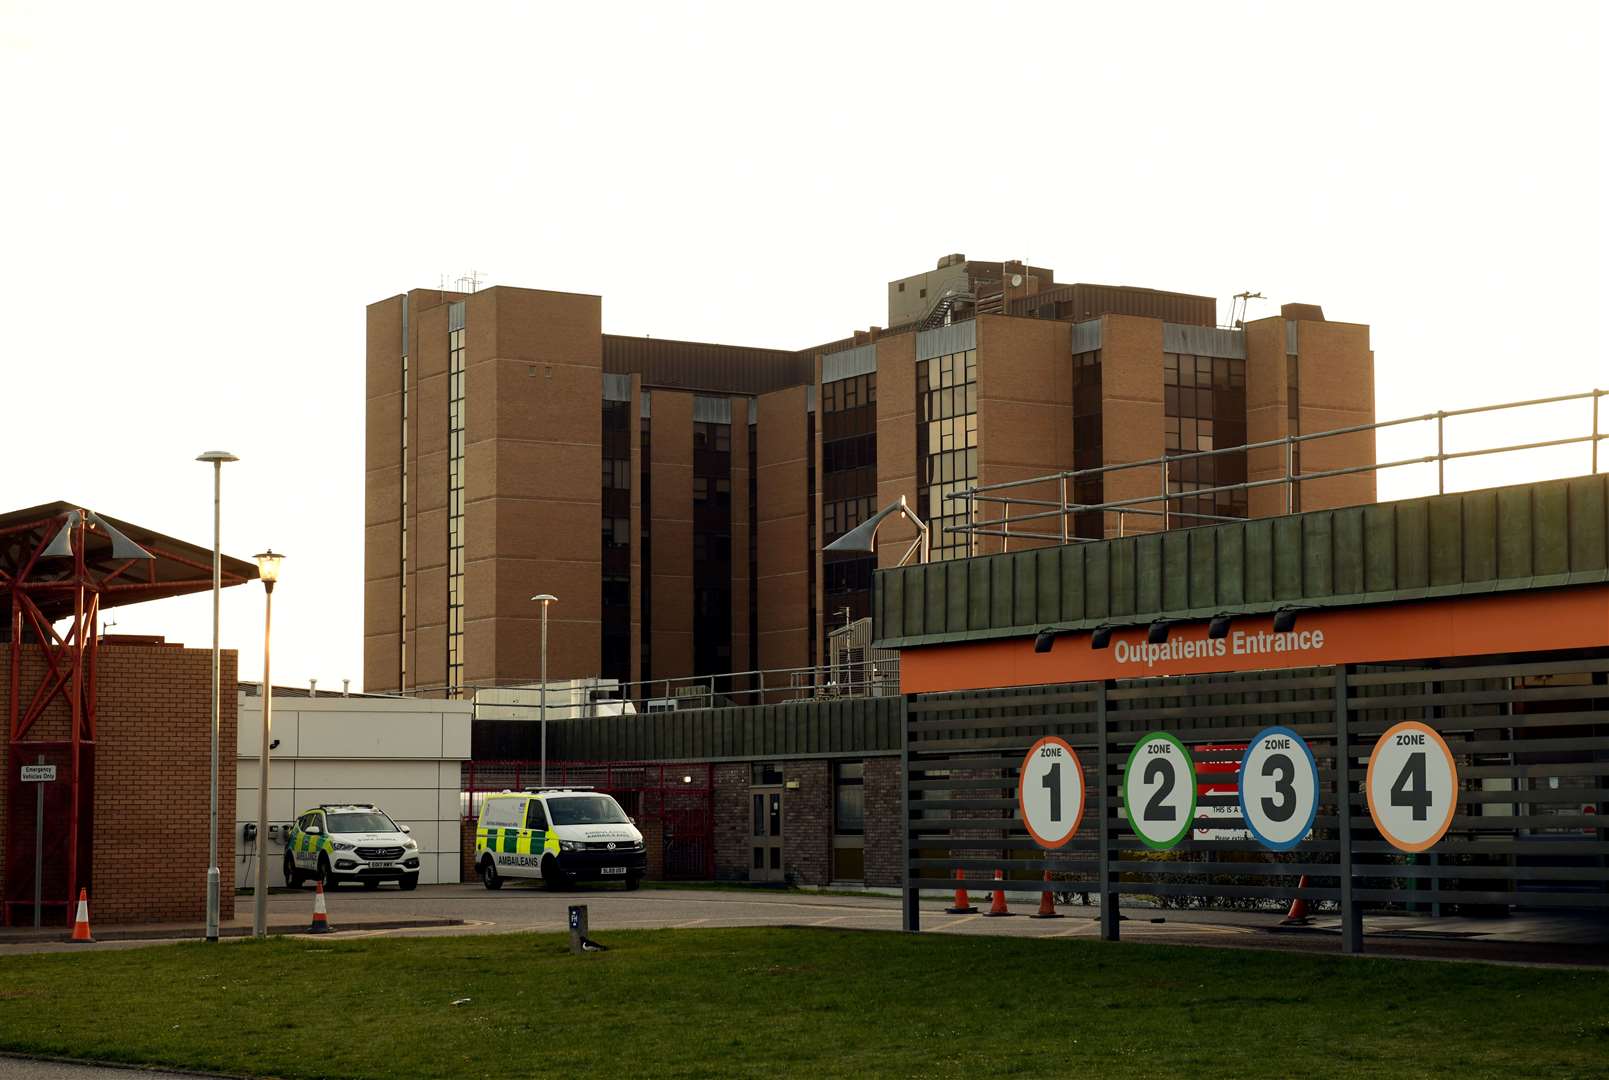 Mark Harvie had taken a patient to Raigmore Hospital where he was threatened by a man.